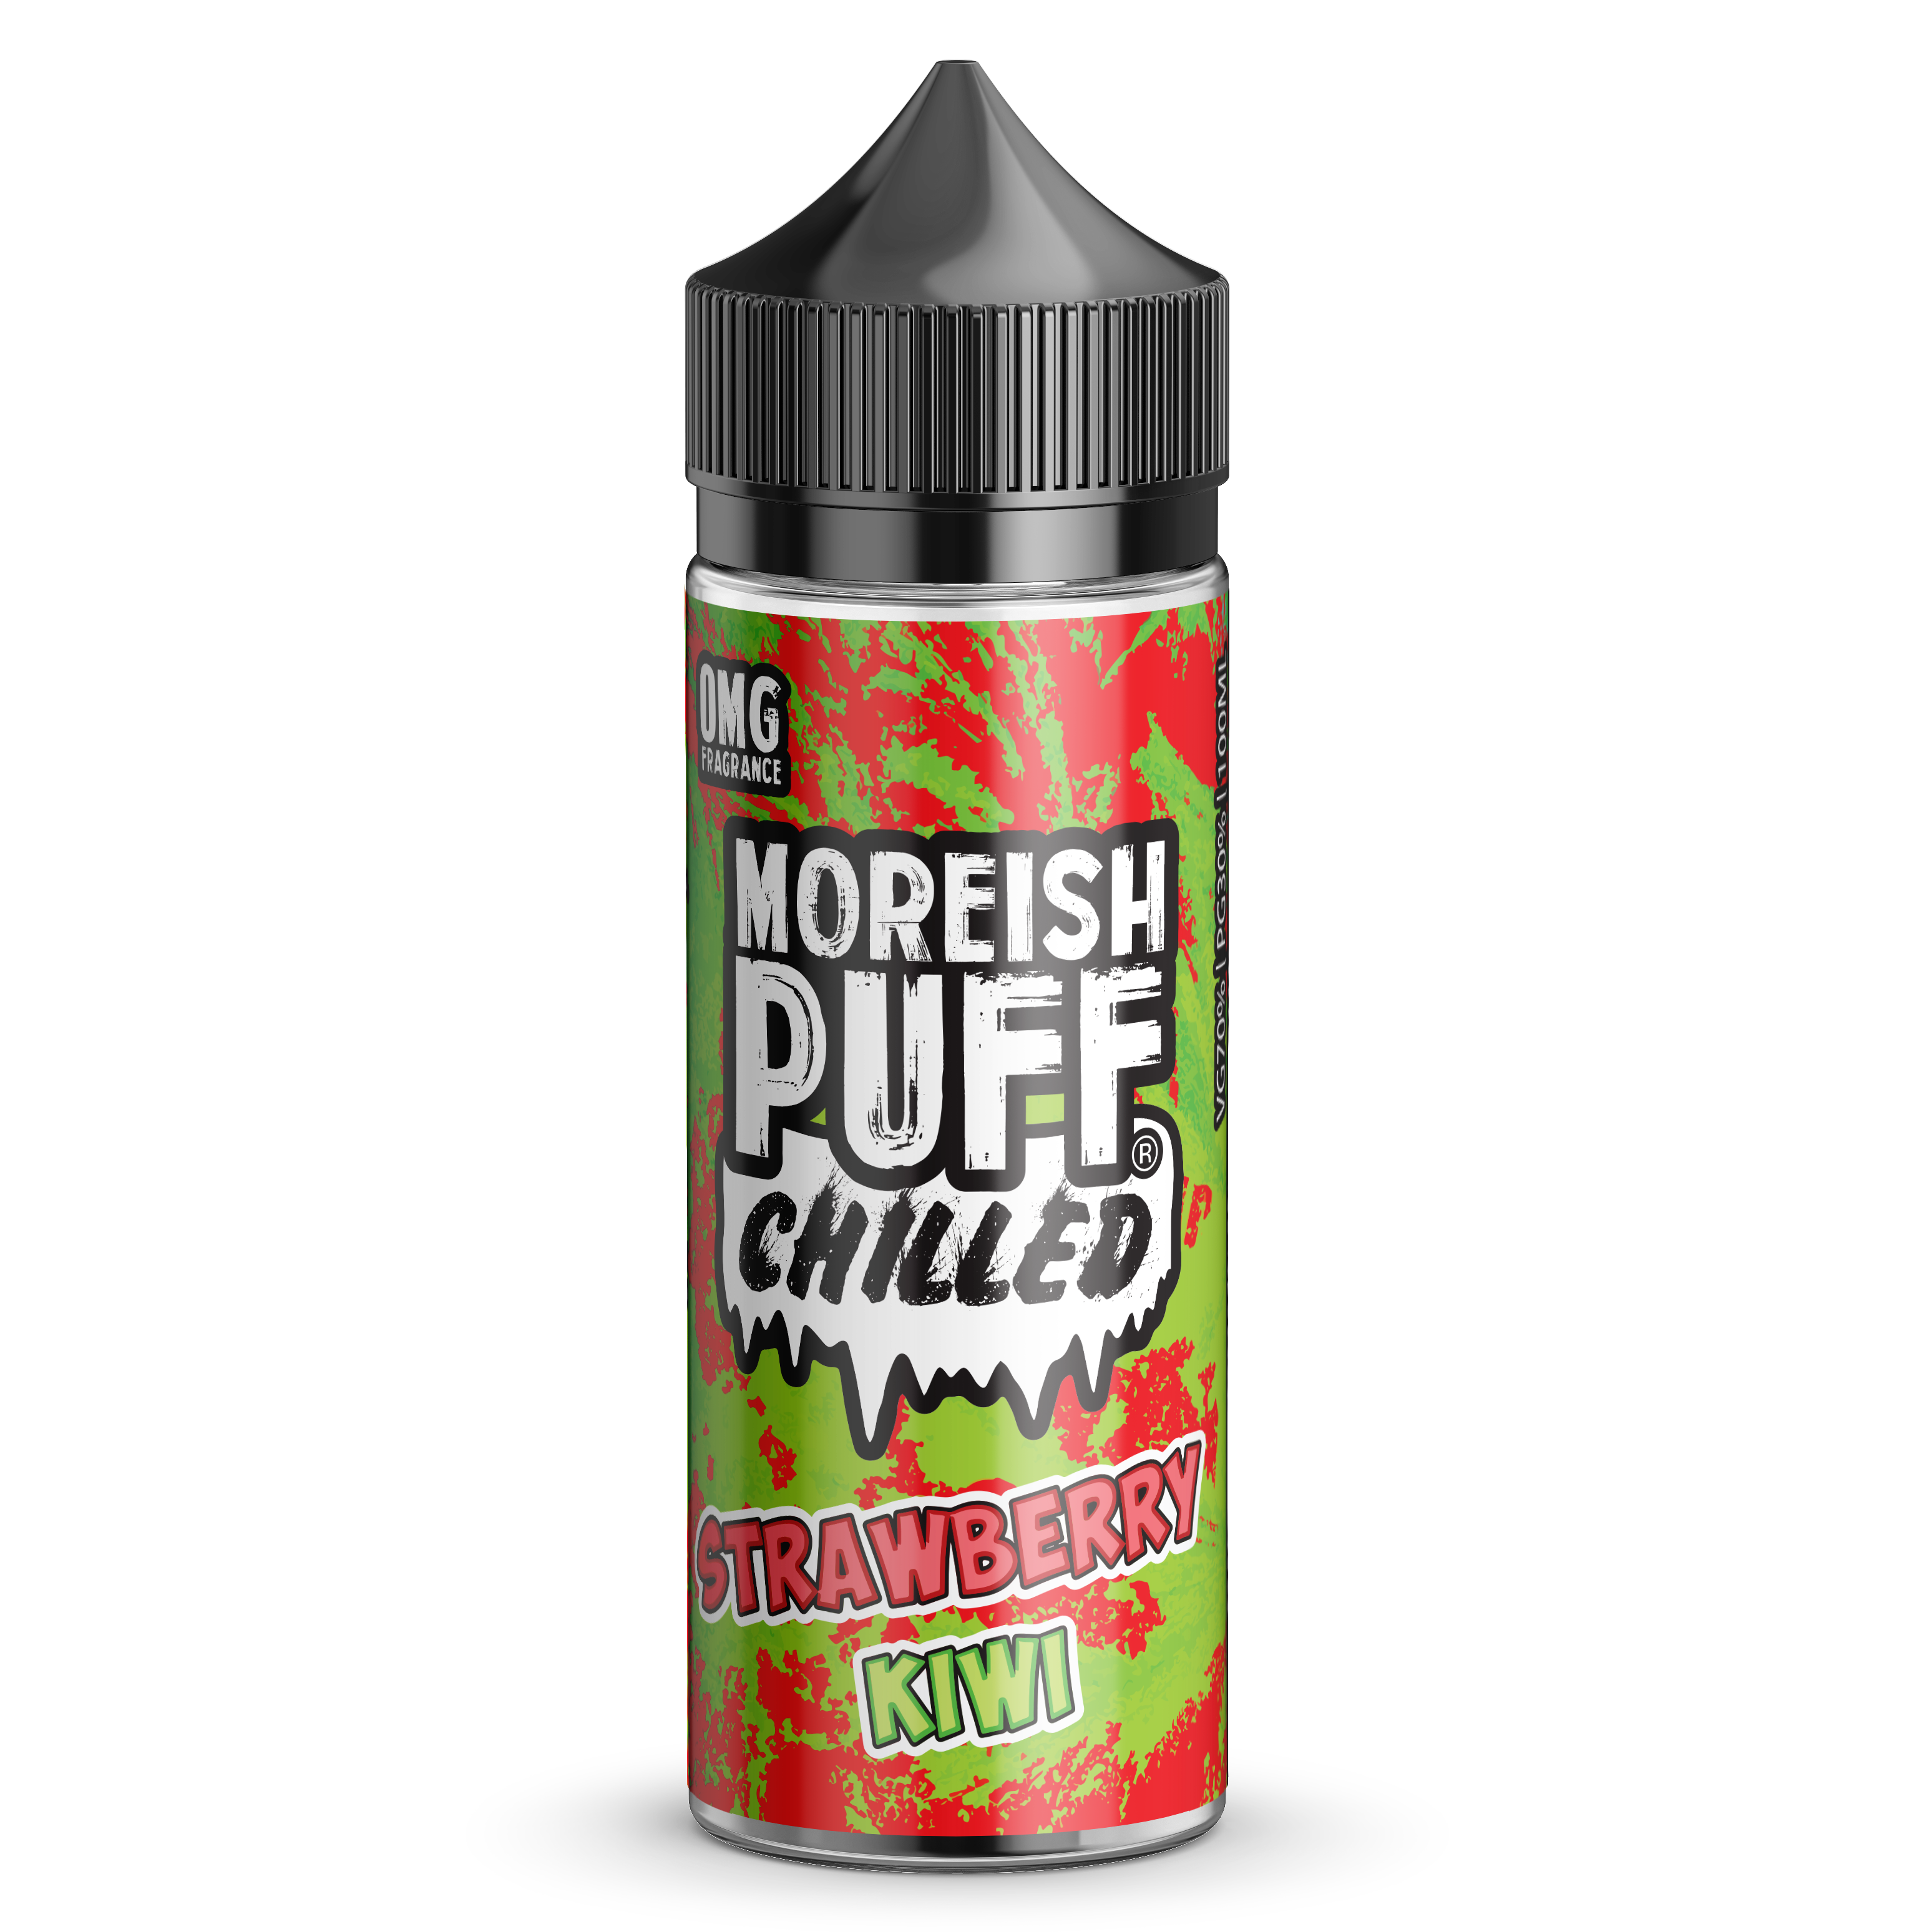 Moreish Puff Chilled: Strawberry and Kiwi Chilled 0mg 100ml Shortfill E-Liquid